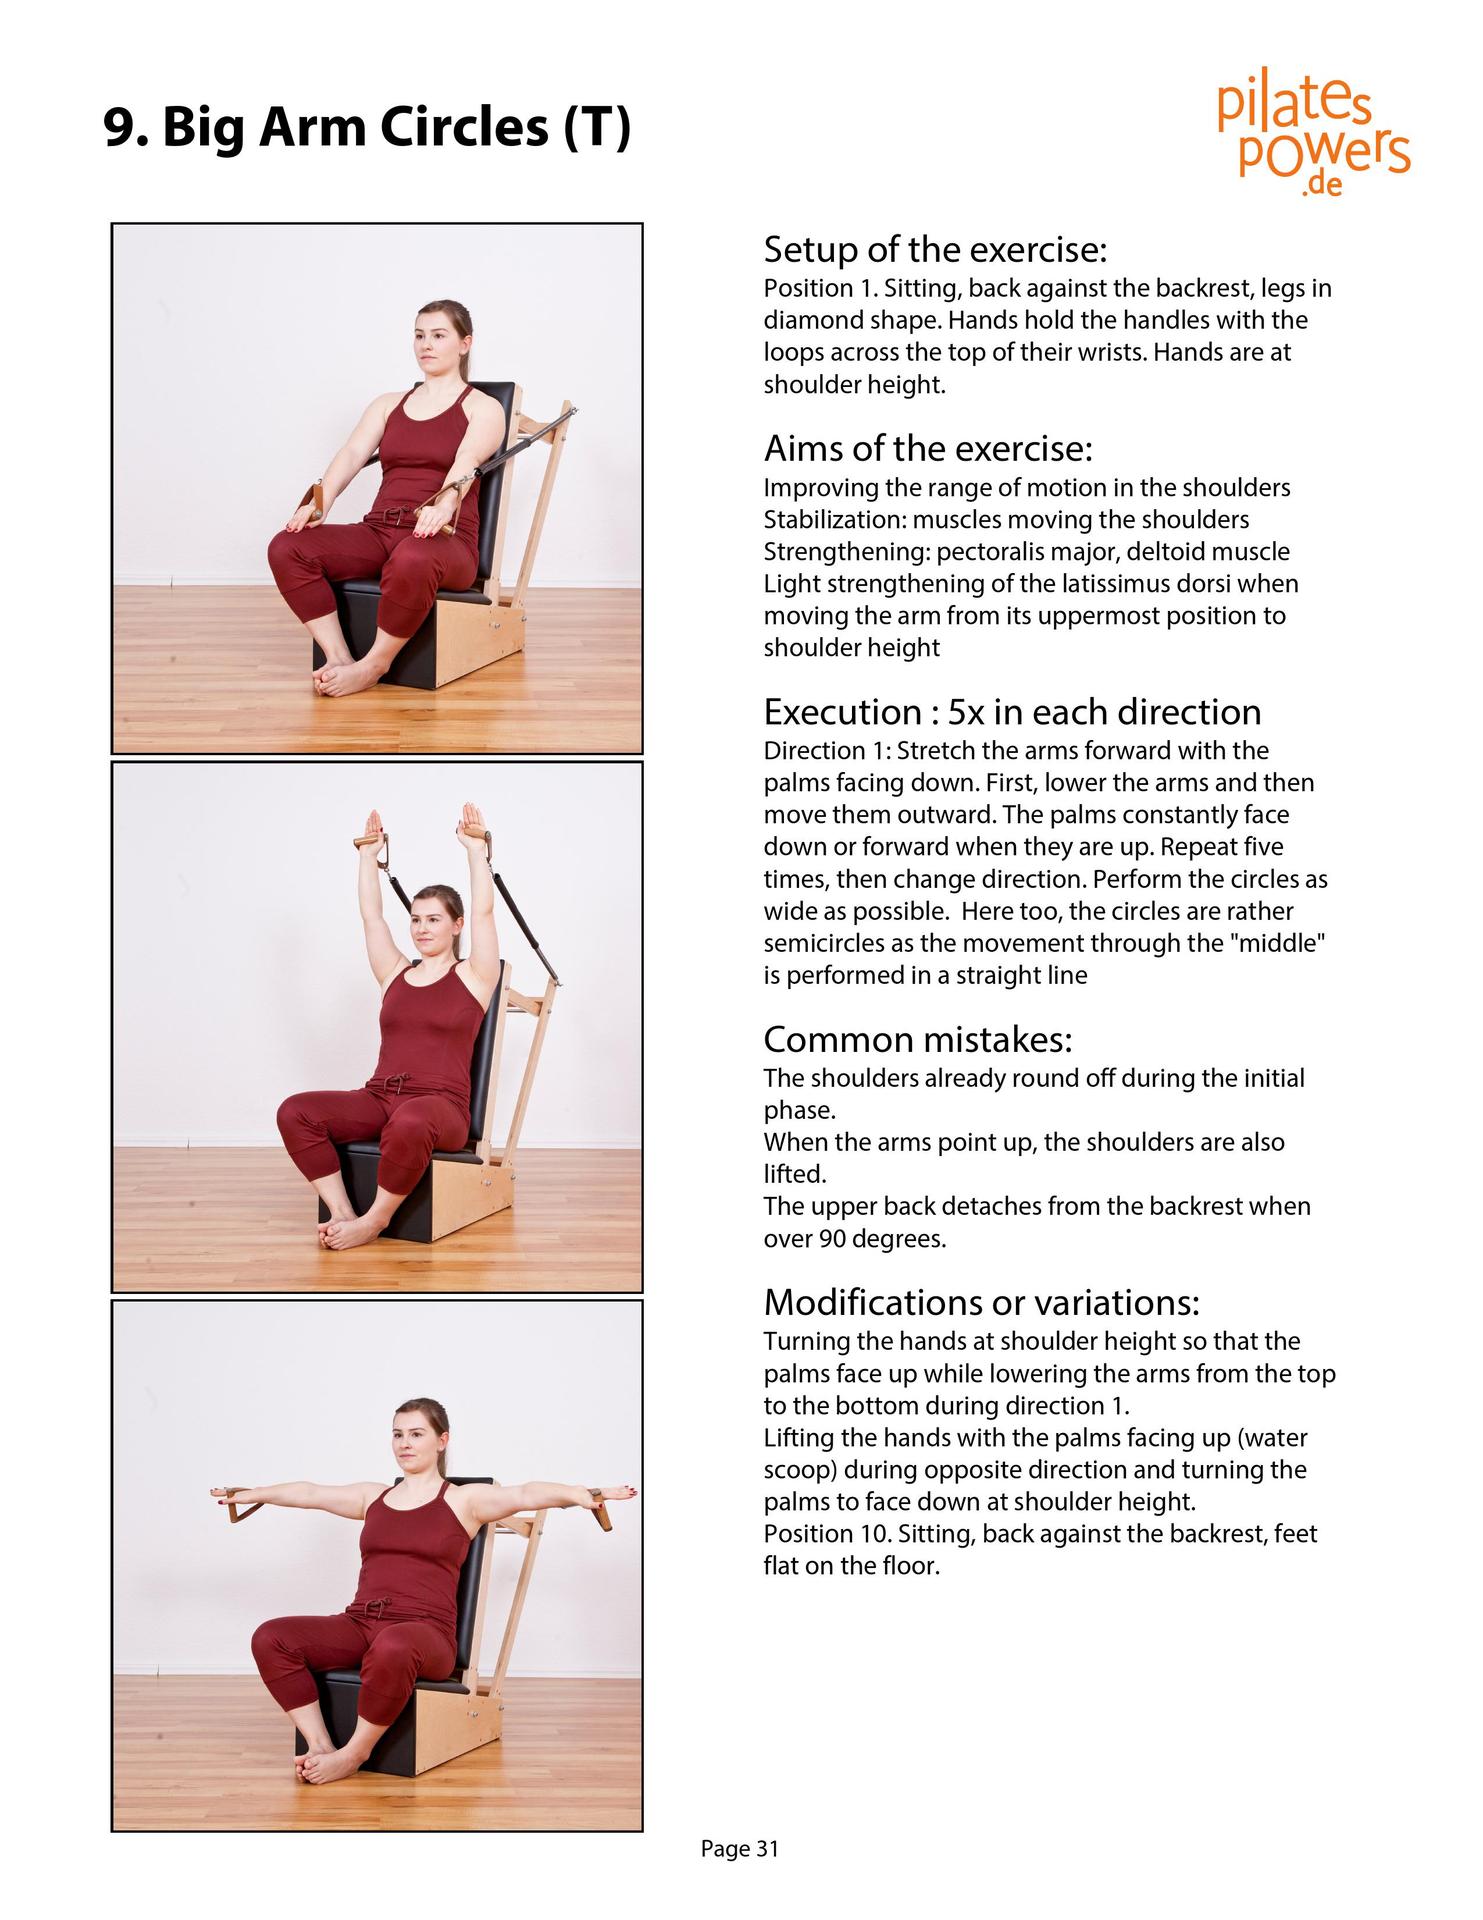 The Pilates Arm Chair The 42 most effective exercises - photo 31